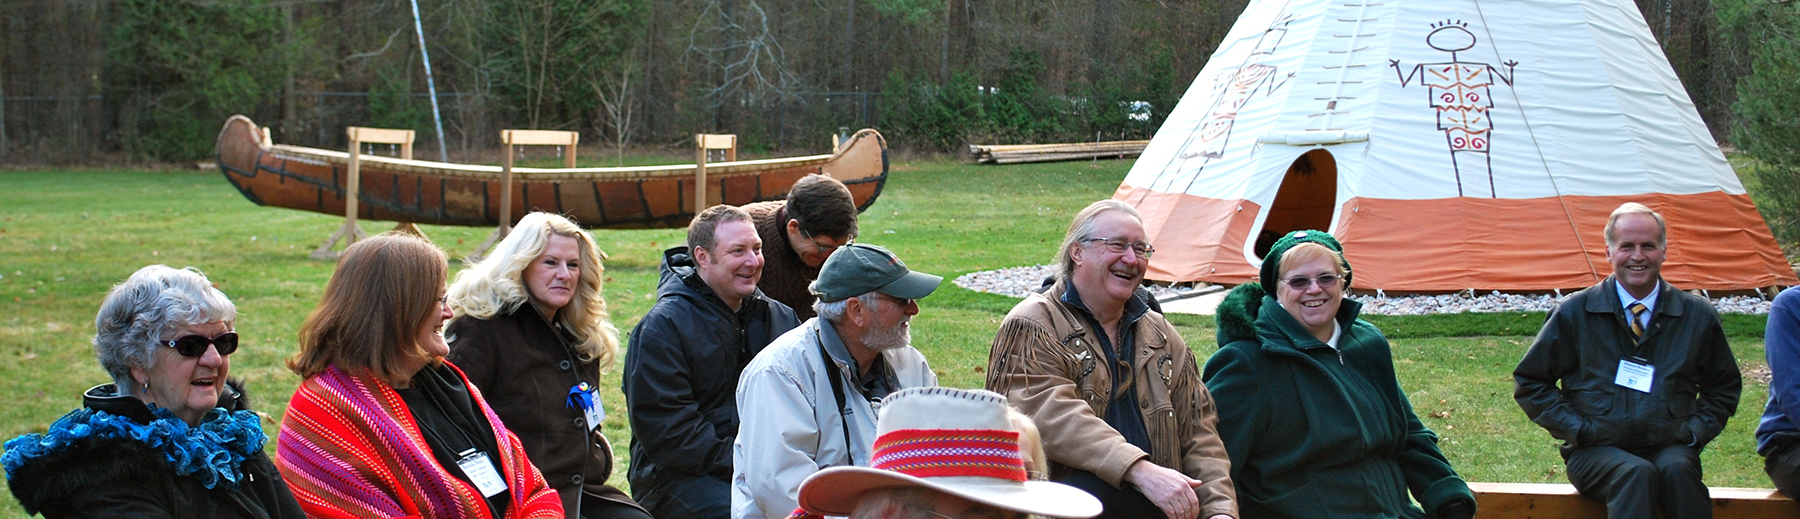 Canoe, teepee and people sitting on benches